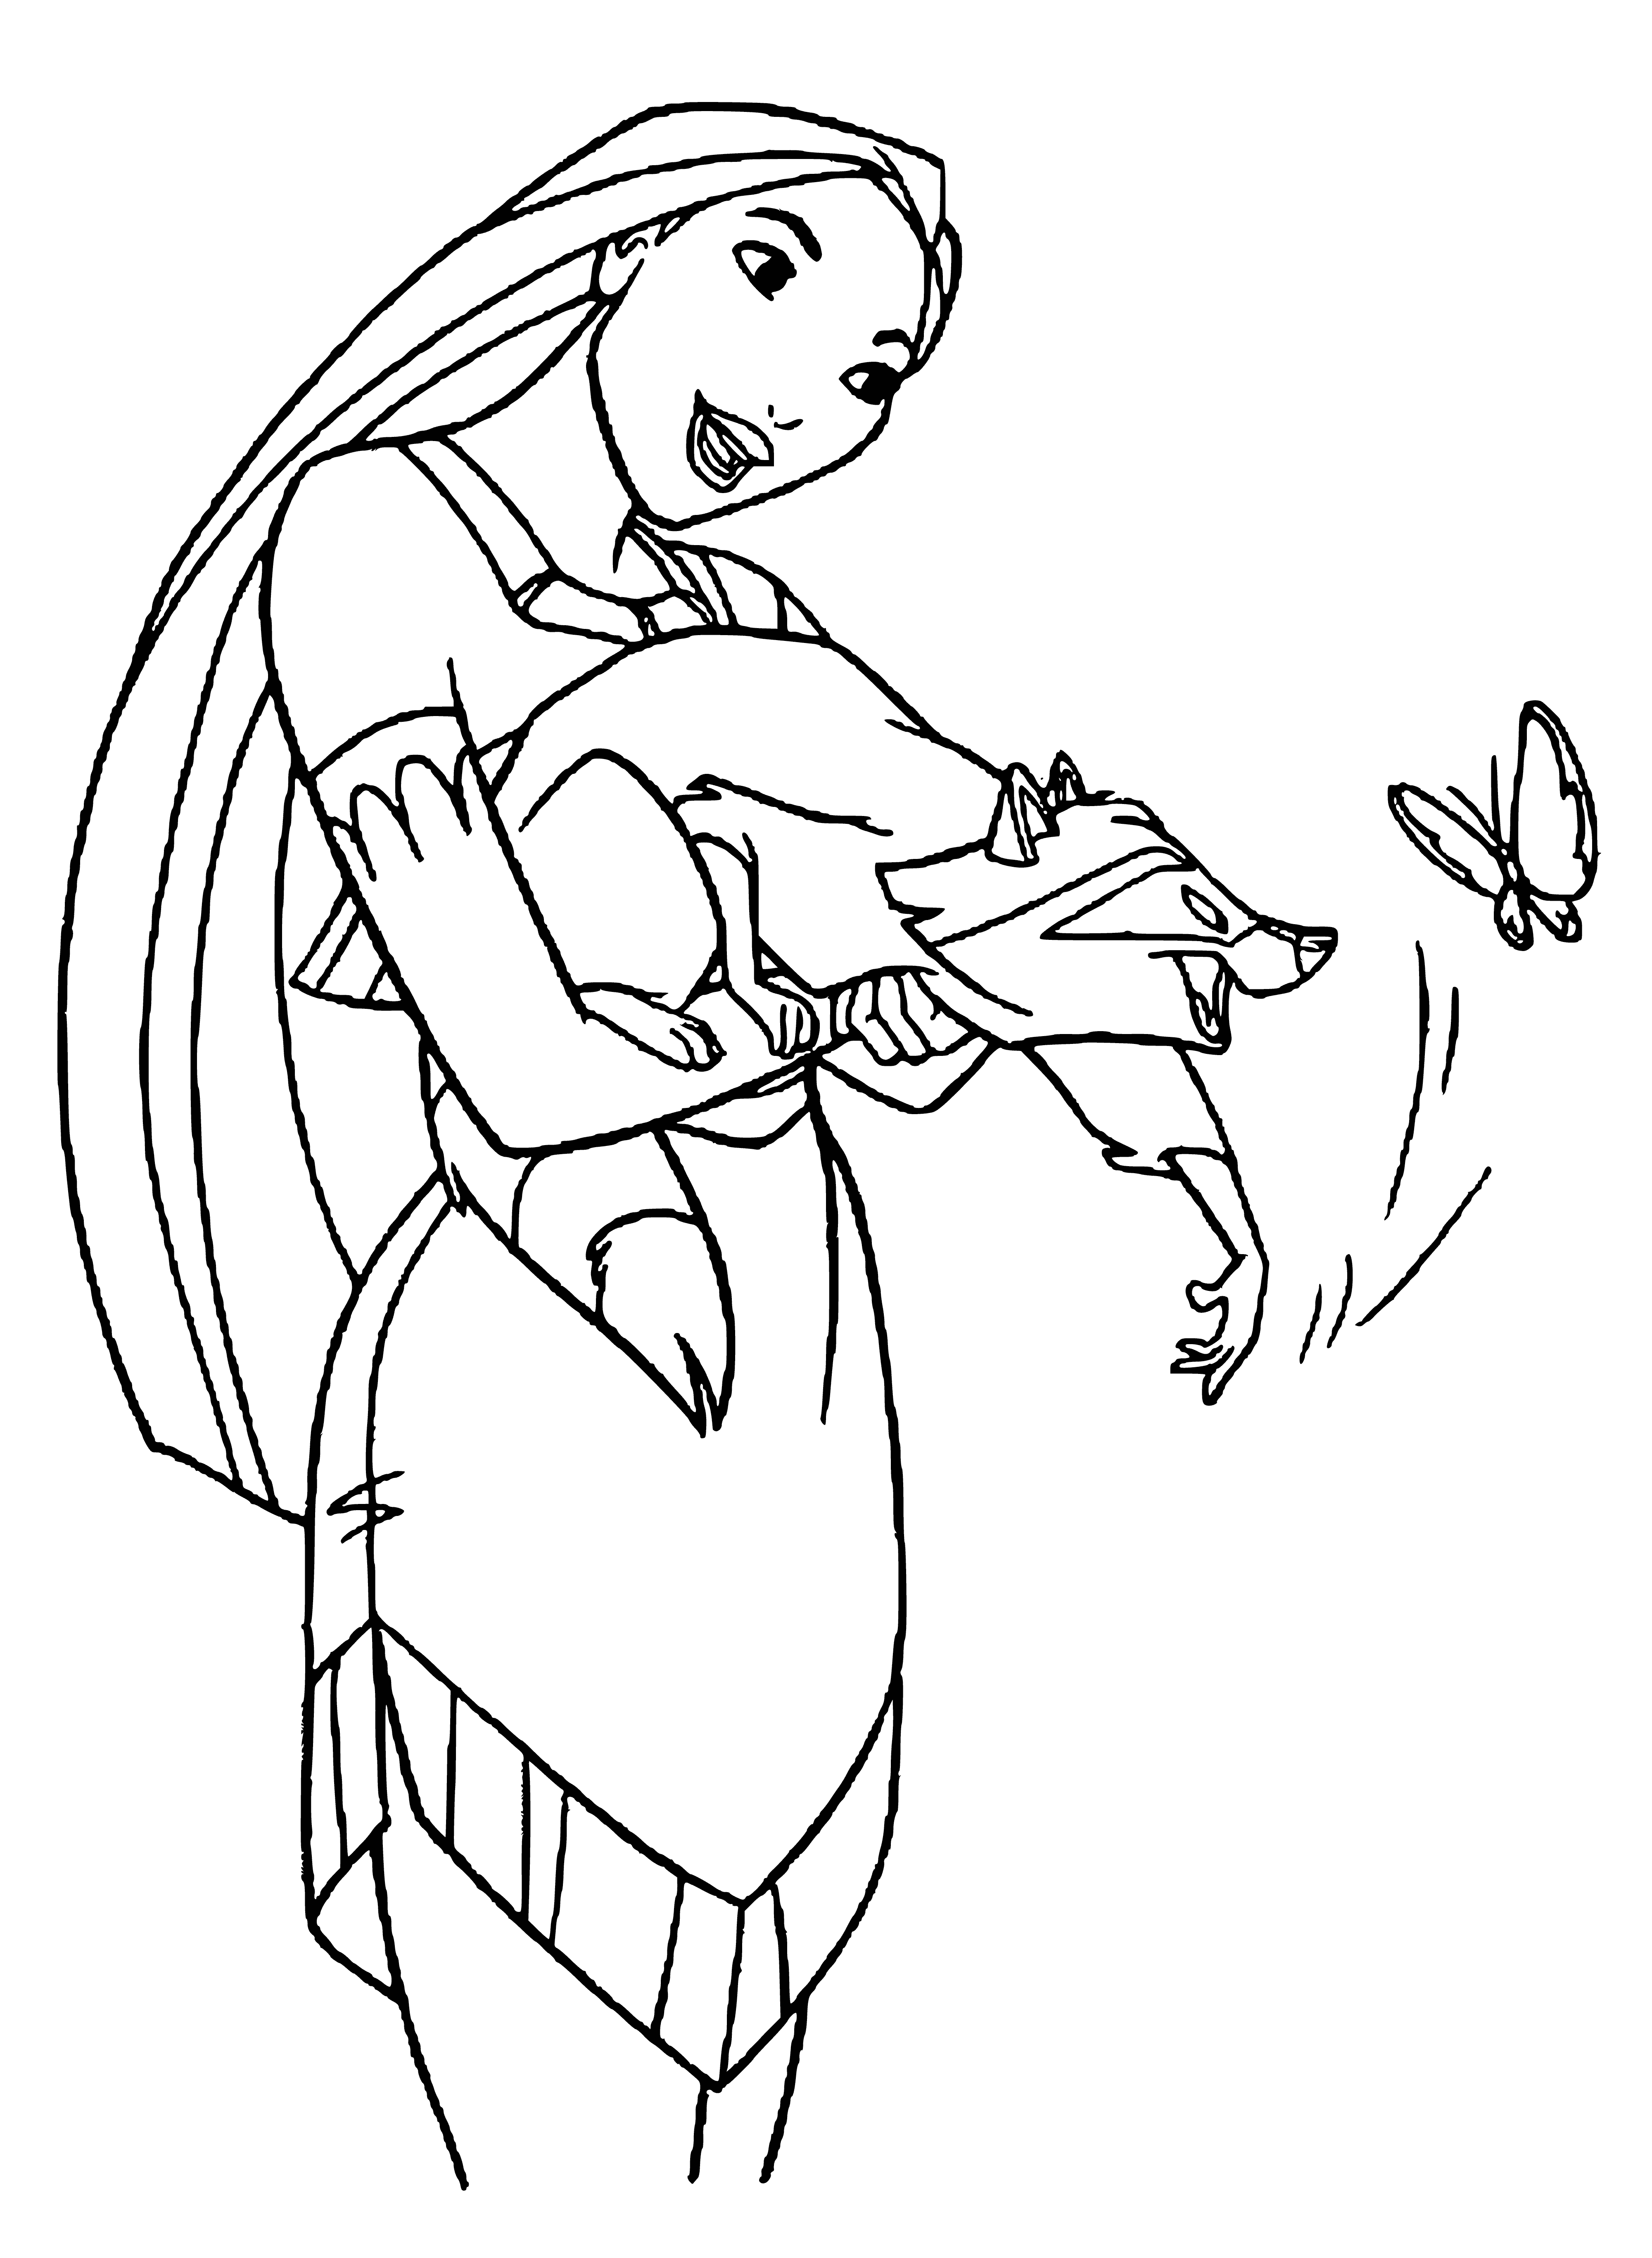 Pocahontas and Miko unit coloring page